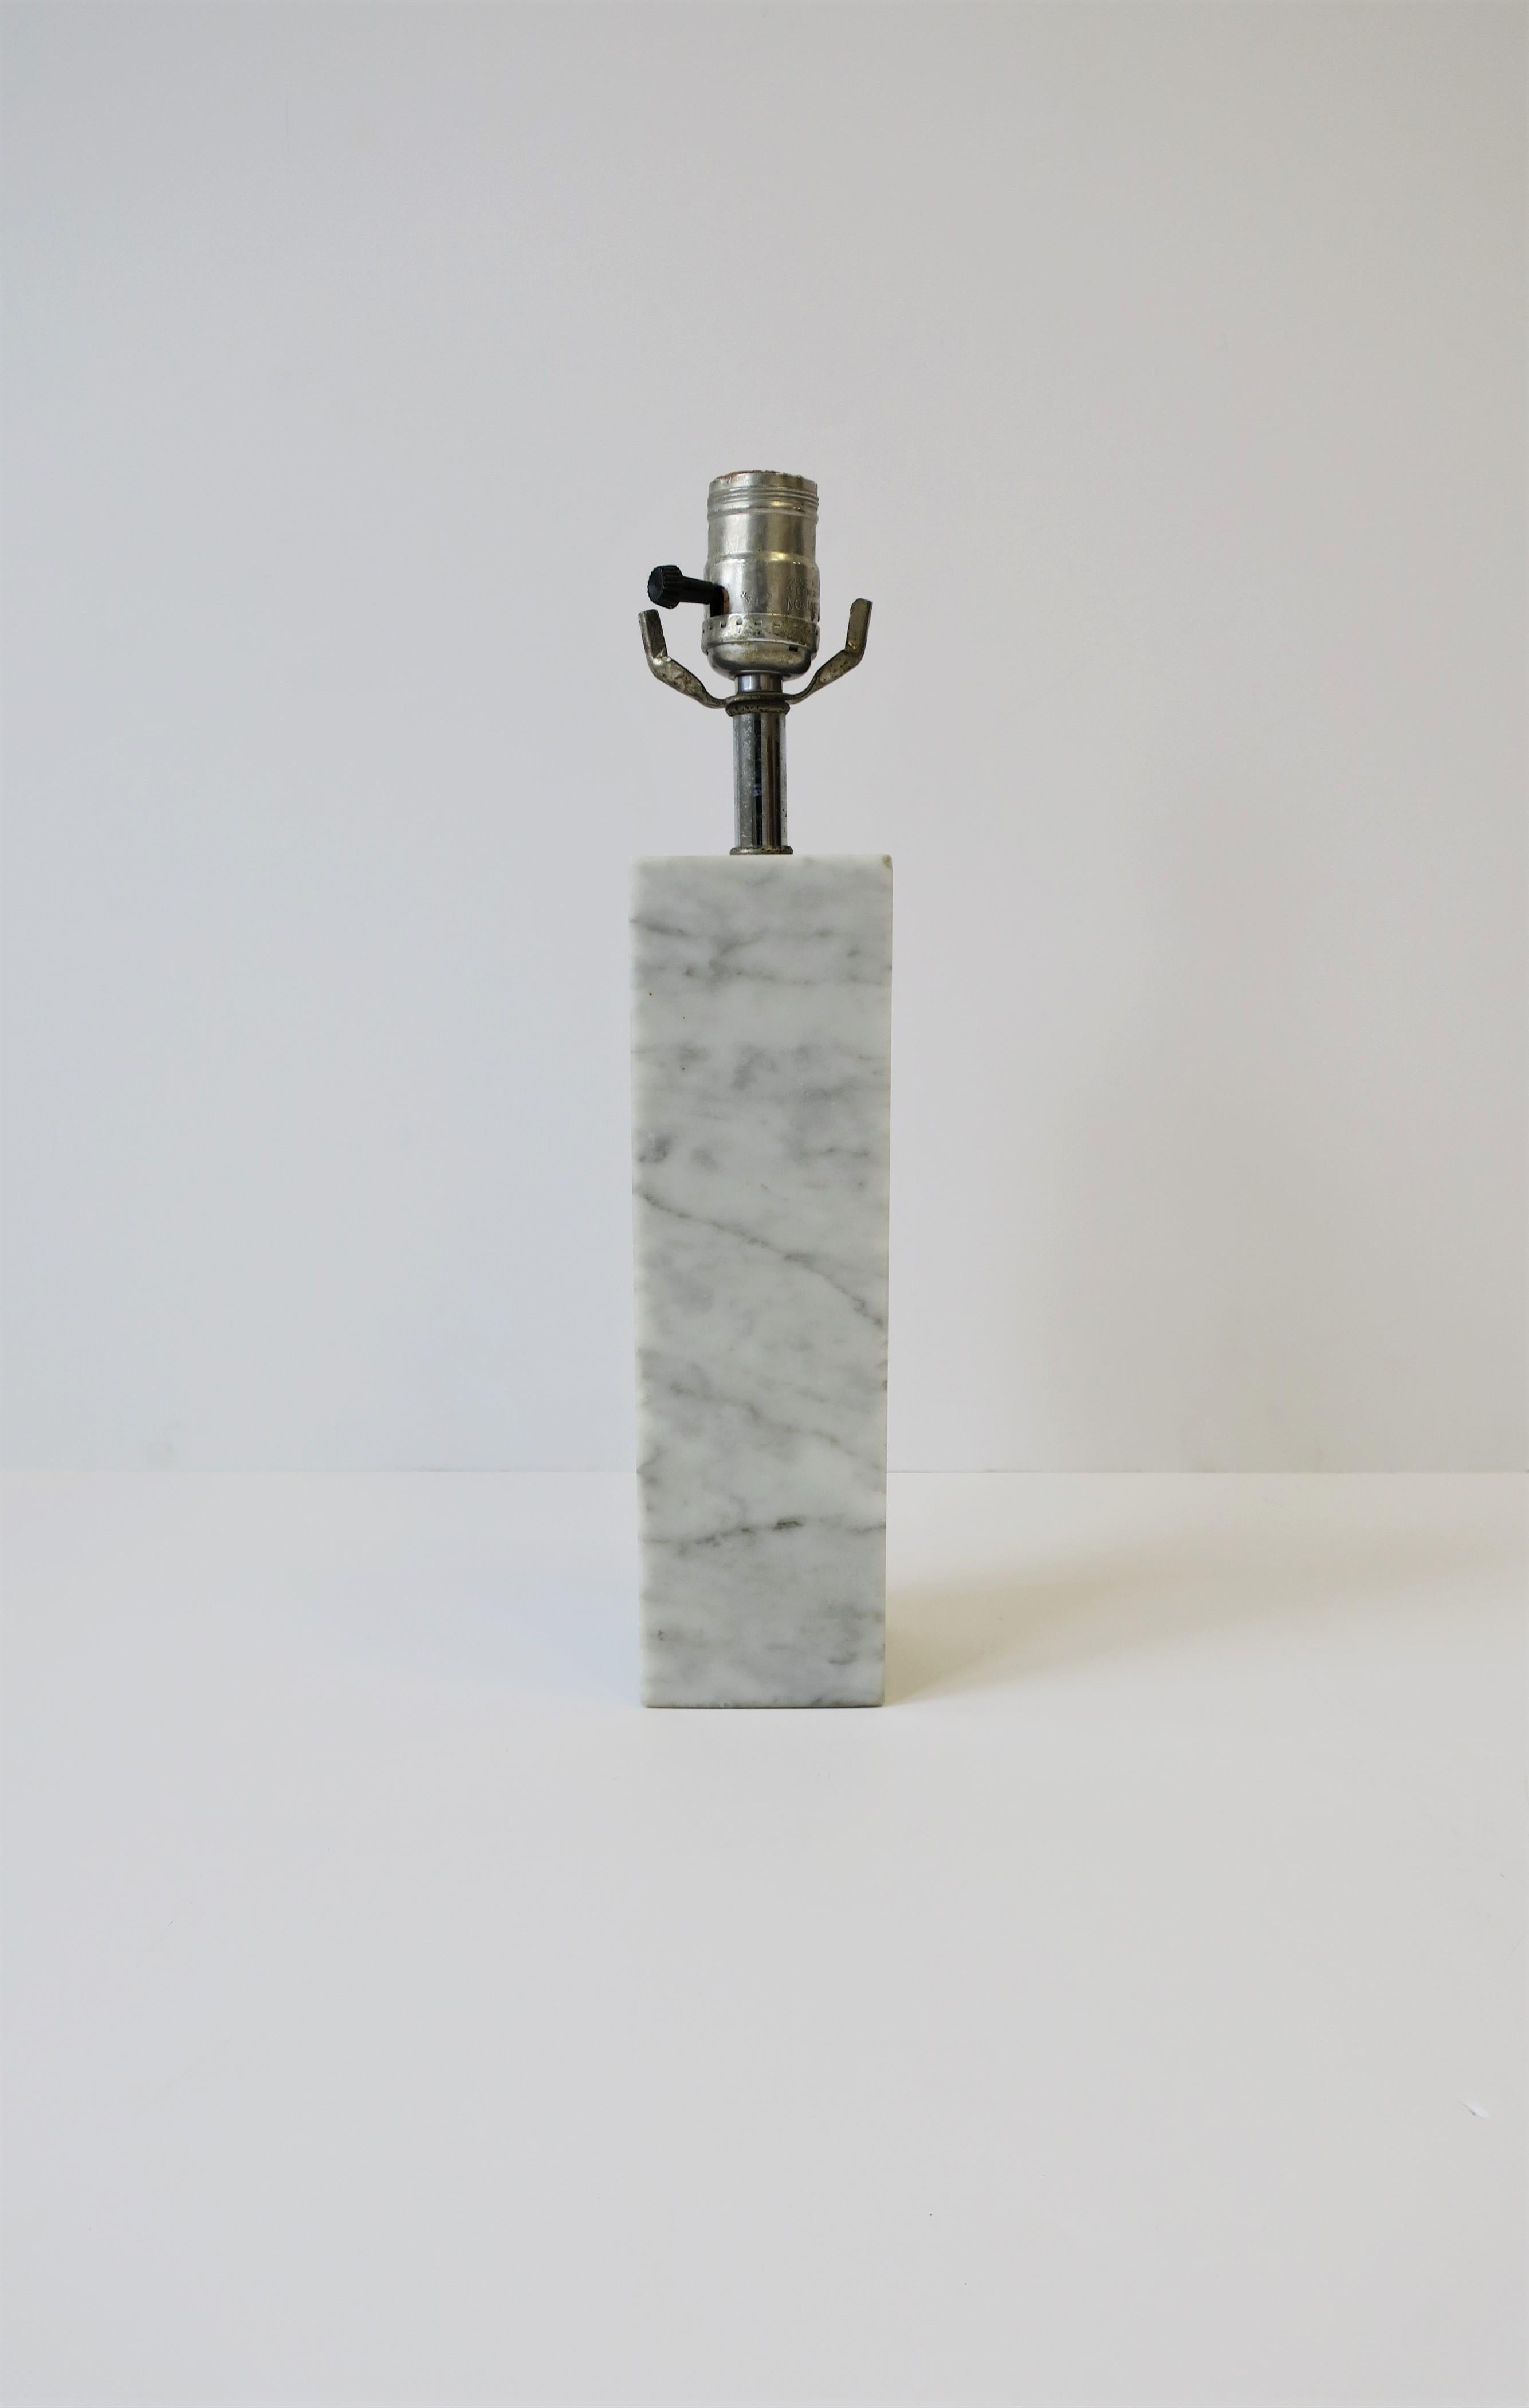 An Italian Modern Postmodern period Carrara marble (white, grey and black) table or desk lamp, circa 1970s, Italy. Light would work well on a desk, vanity, small table, etc. Lamp is a convenient size, measurements below. Rewiring and new harp